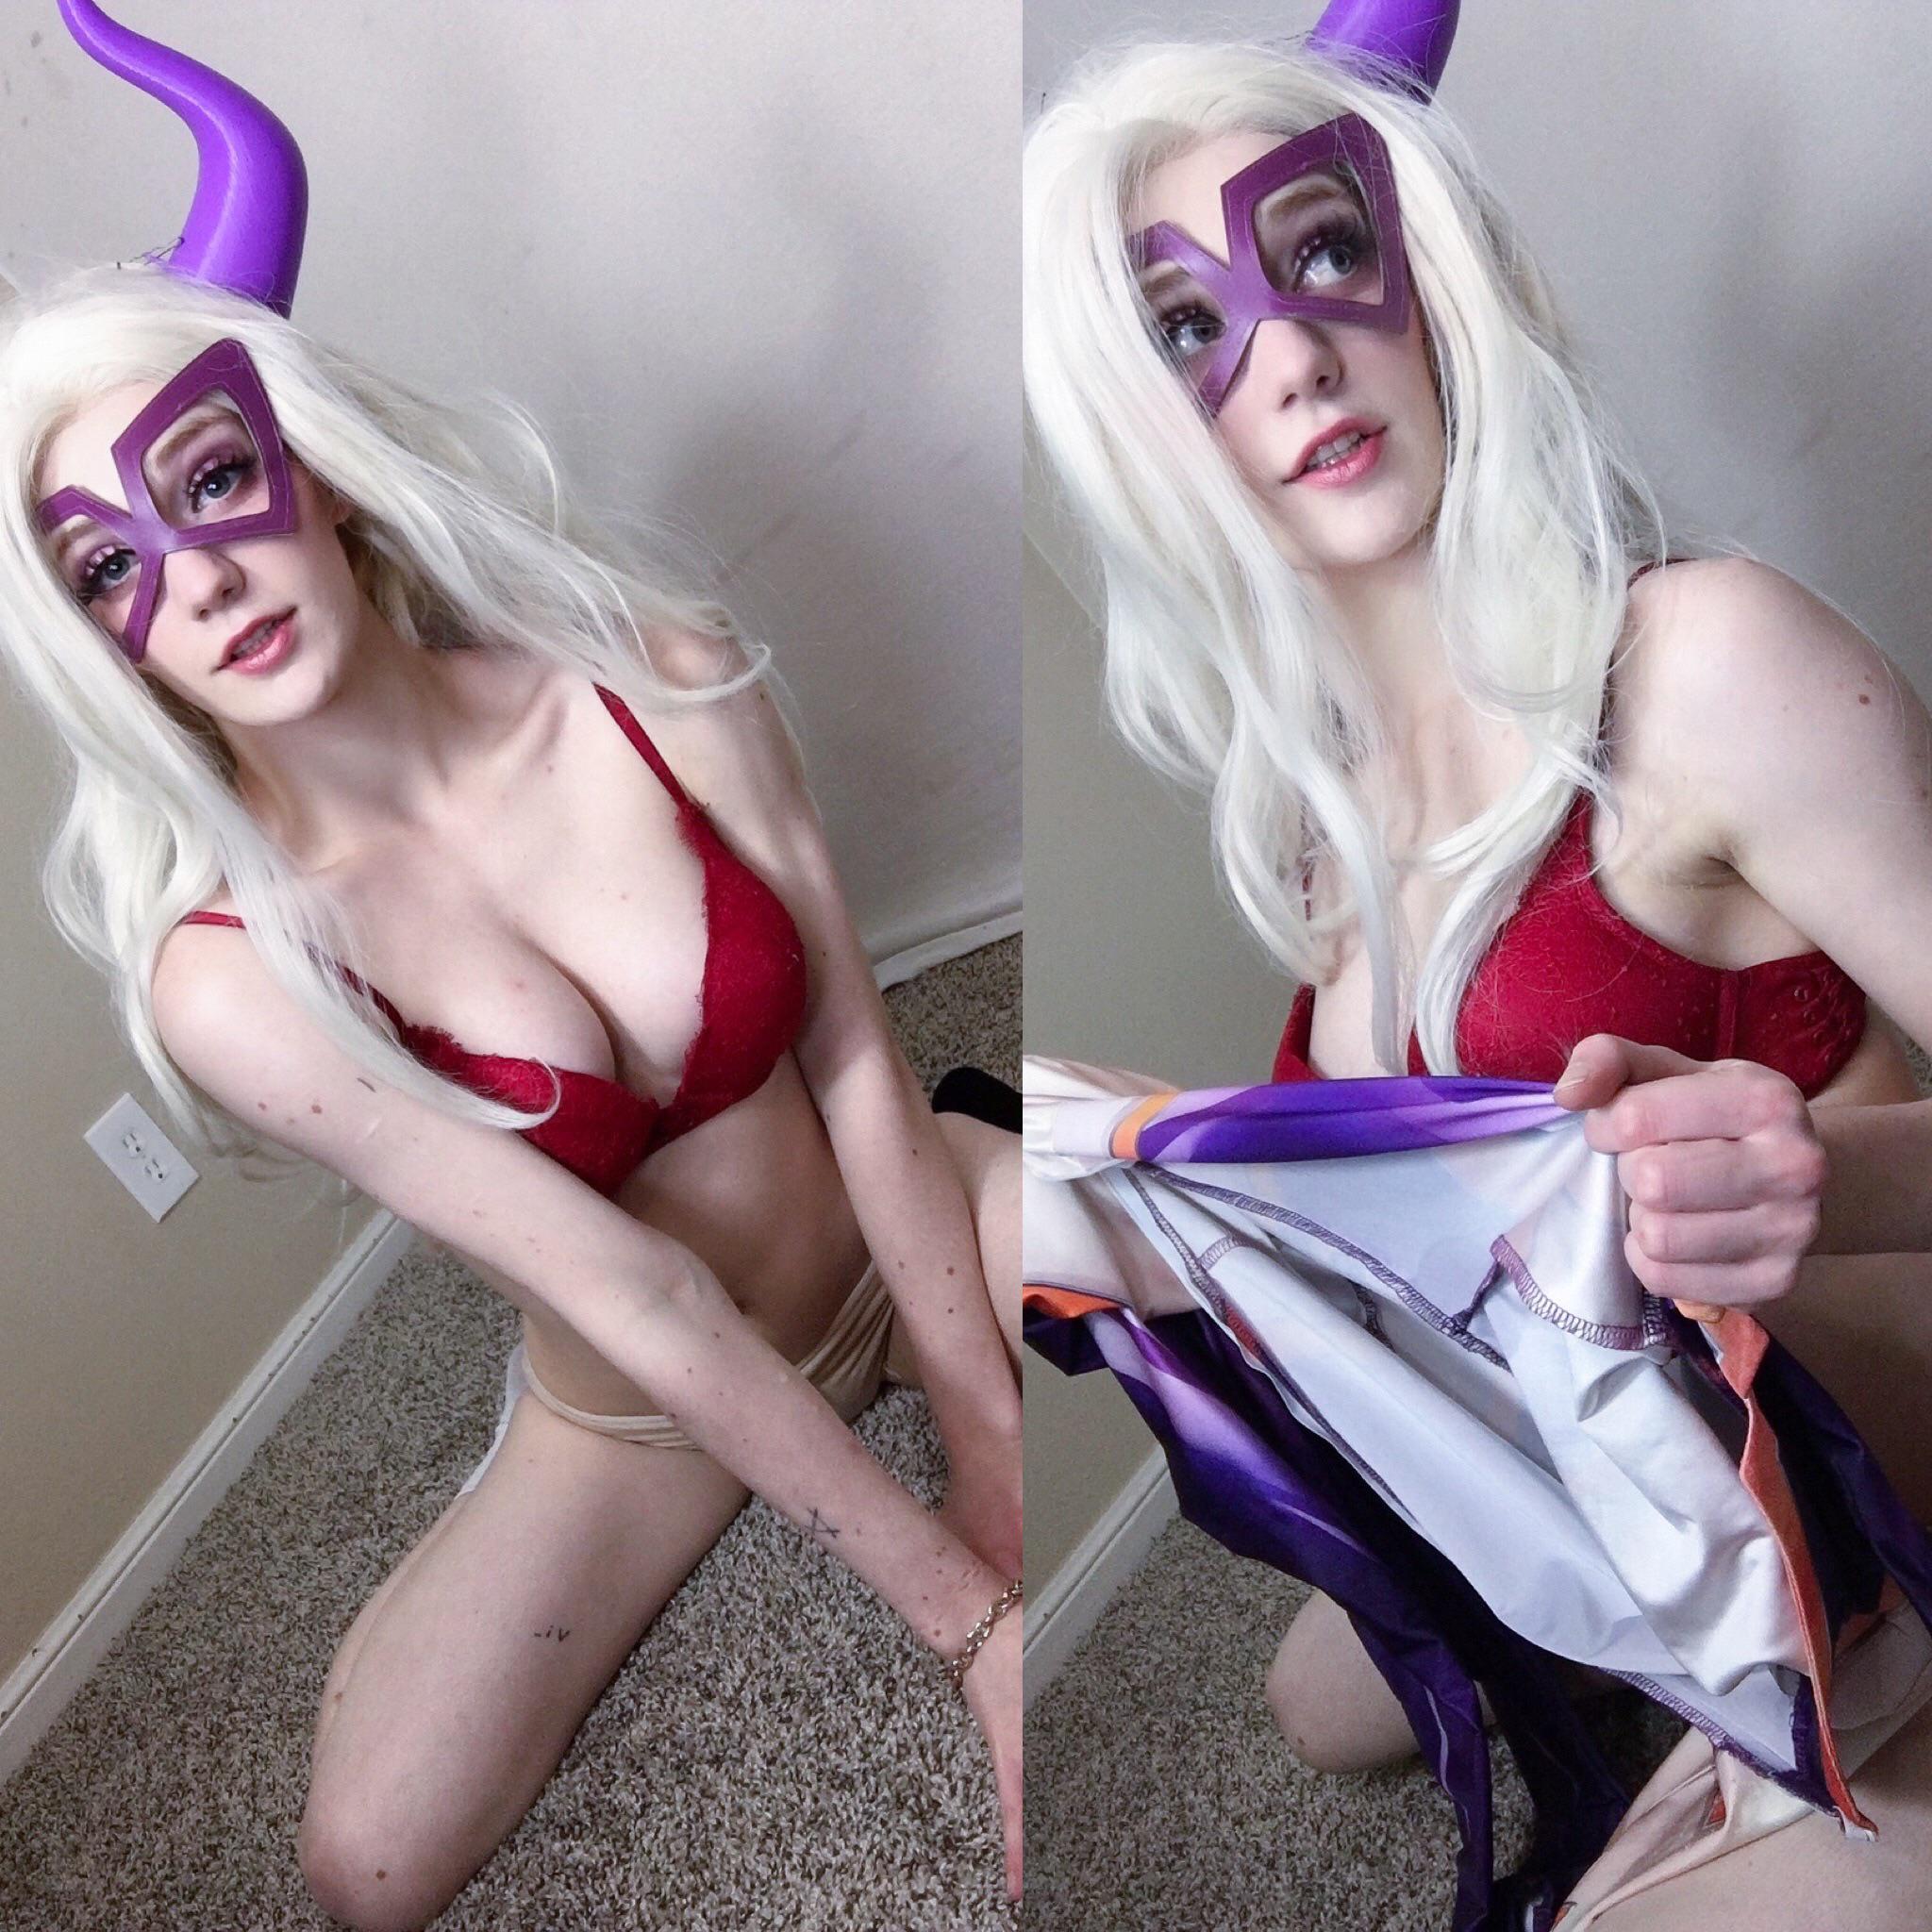 Mount Lady Cosplay From My Hero Academia By Discount.Yam